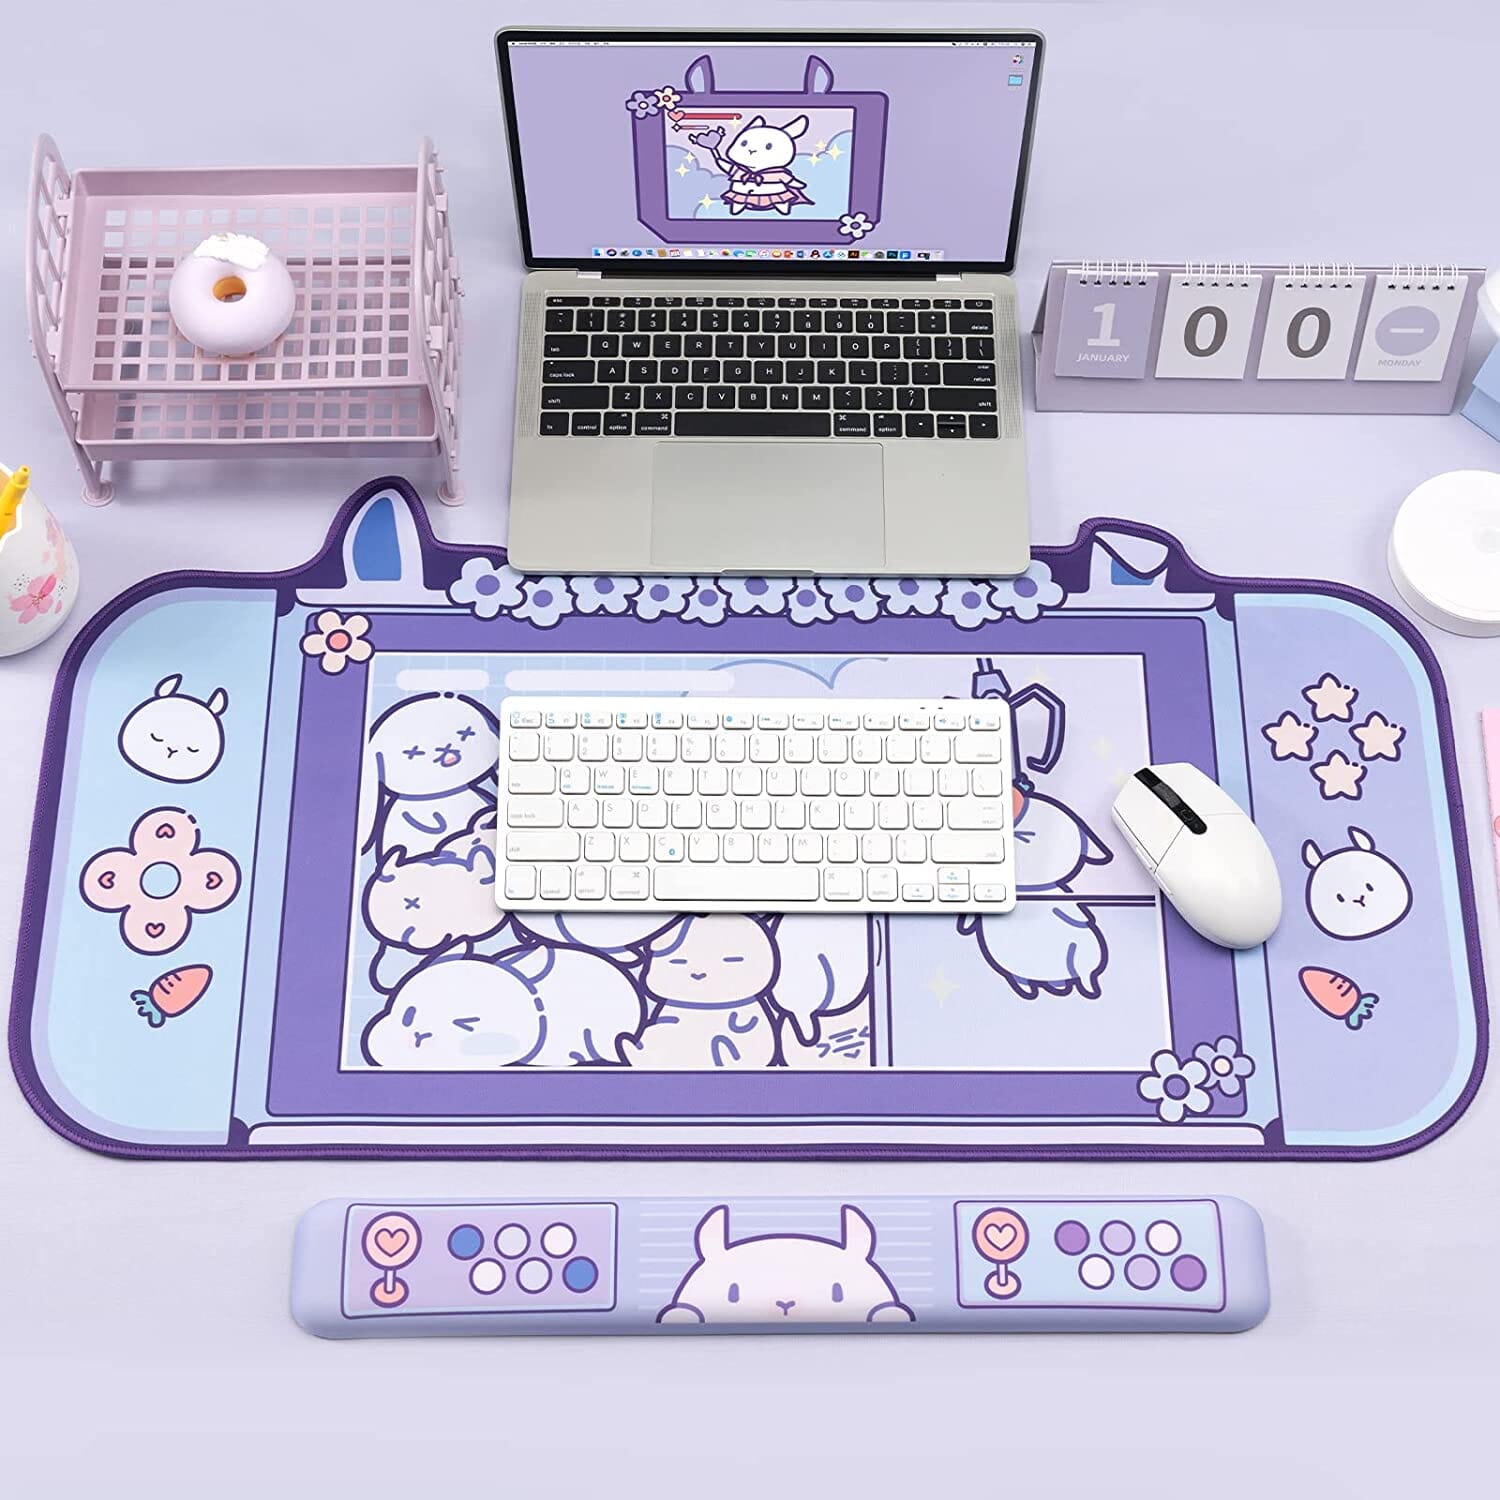 Kawaii Rabbit Trap Gaming Mouse Pad 44cm*80cm Super Cute Thickened Office Computer Big Mouse Pad Keyboard pad Wrist Rest Girl 0 GatoGeek 